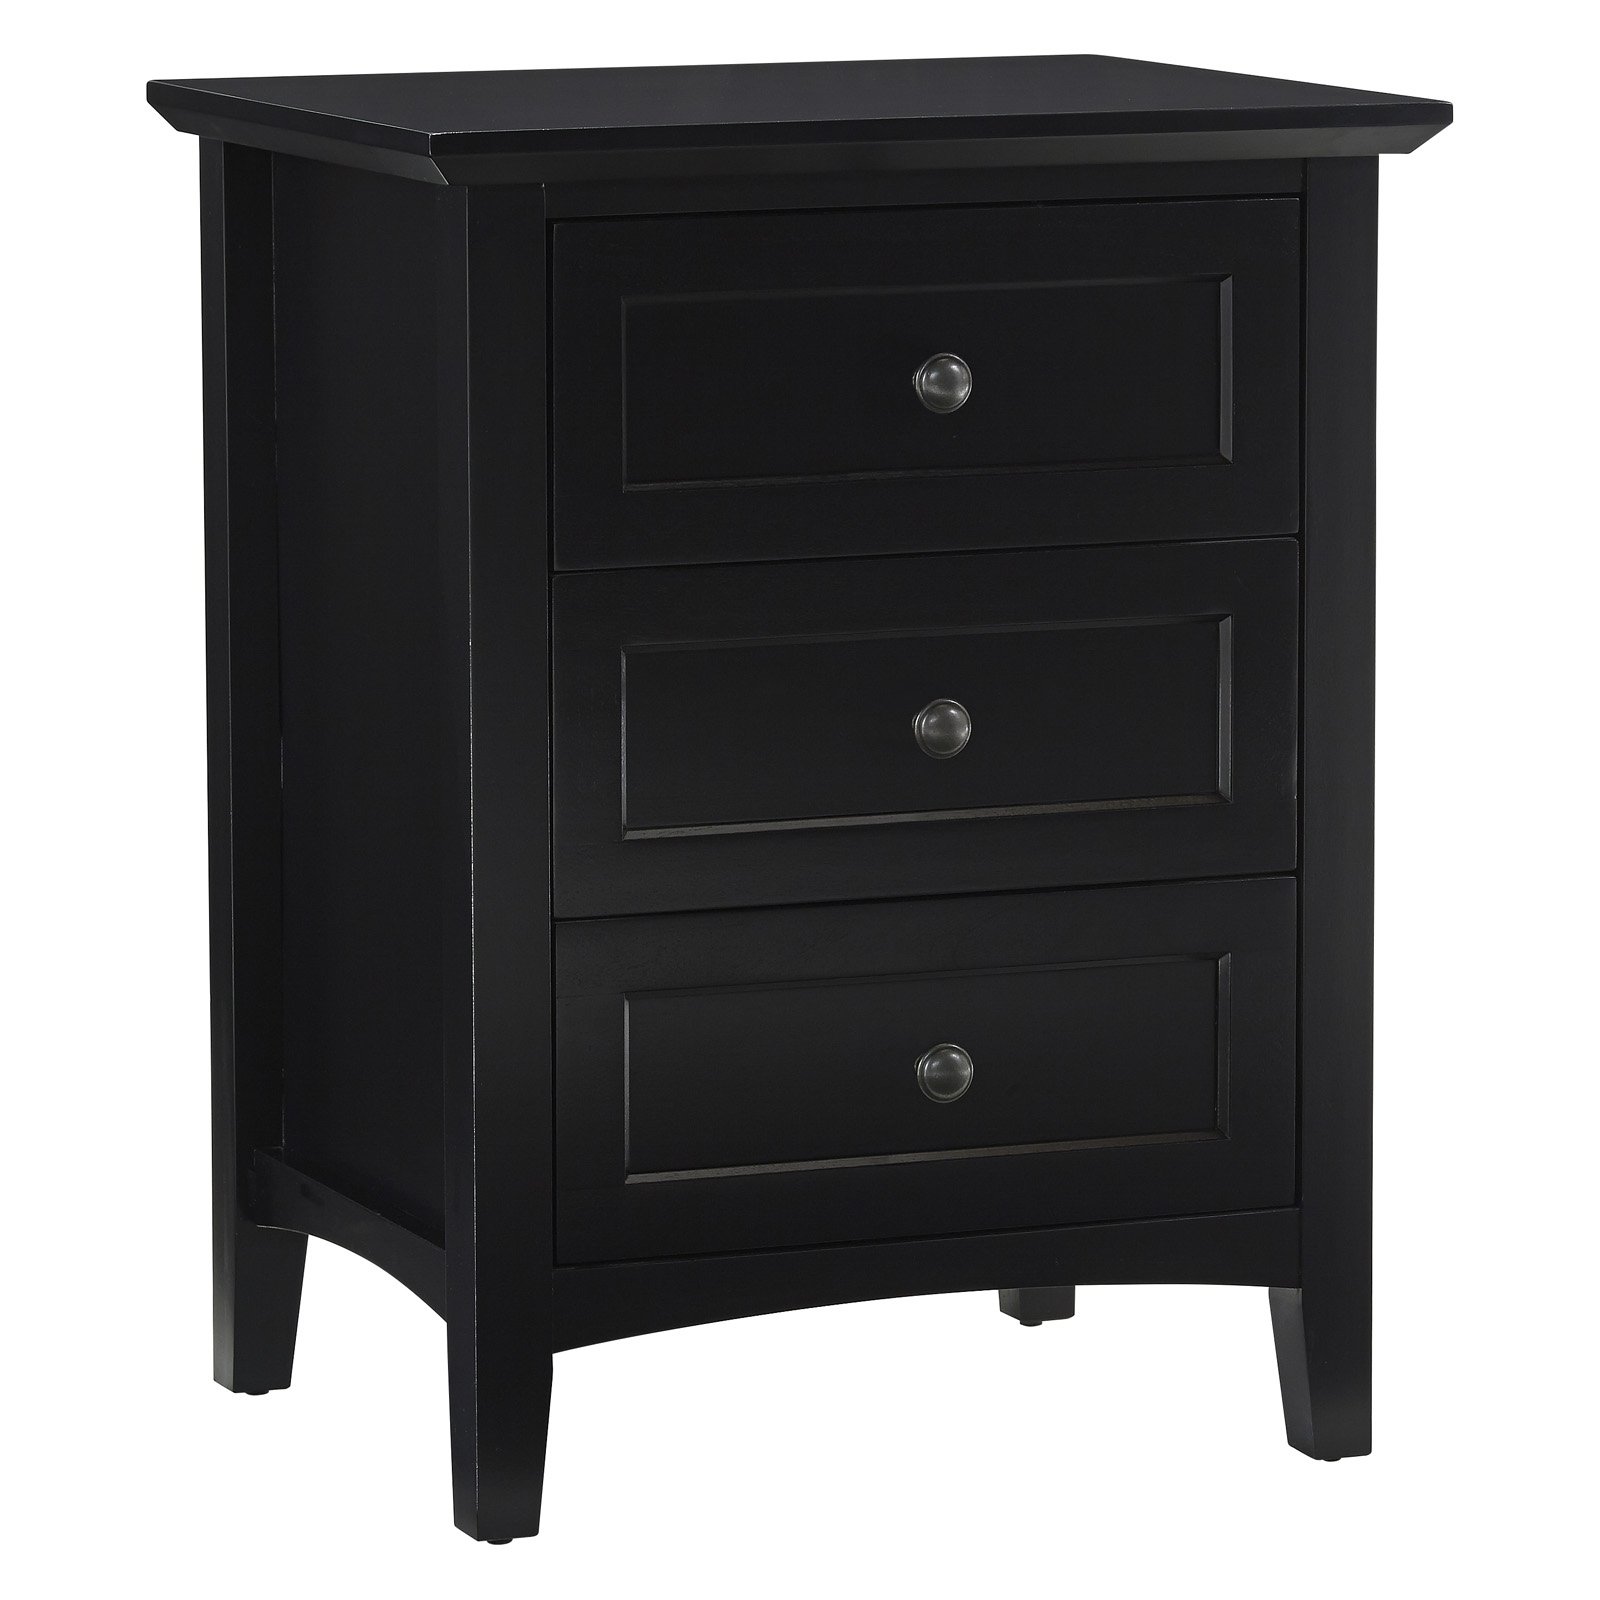 Modus Paragon 3 Drawer Nightstand in Black - image 1 of 7